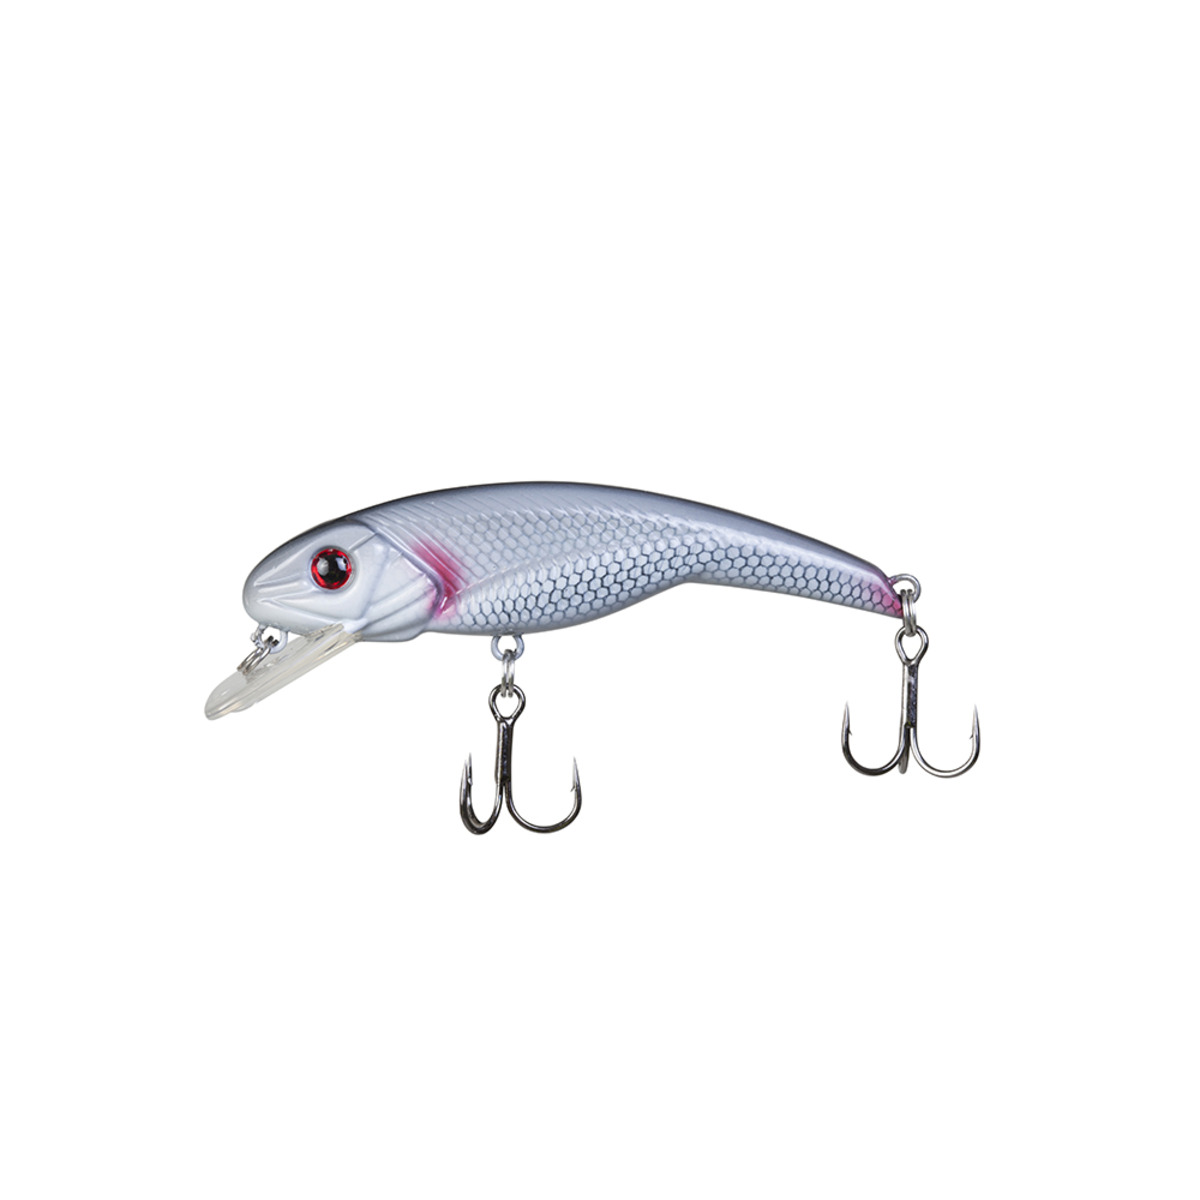 Korum Double Hard Lures  Midwater Shad - Silverfish 7 cm